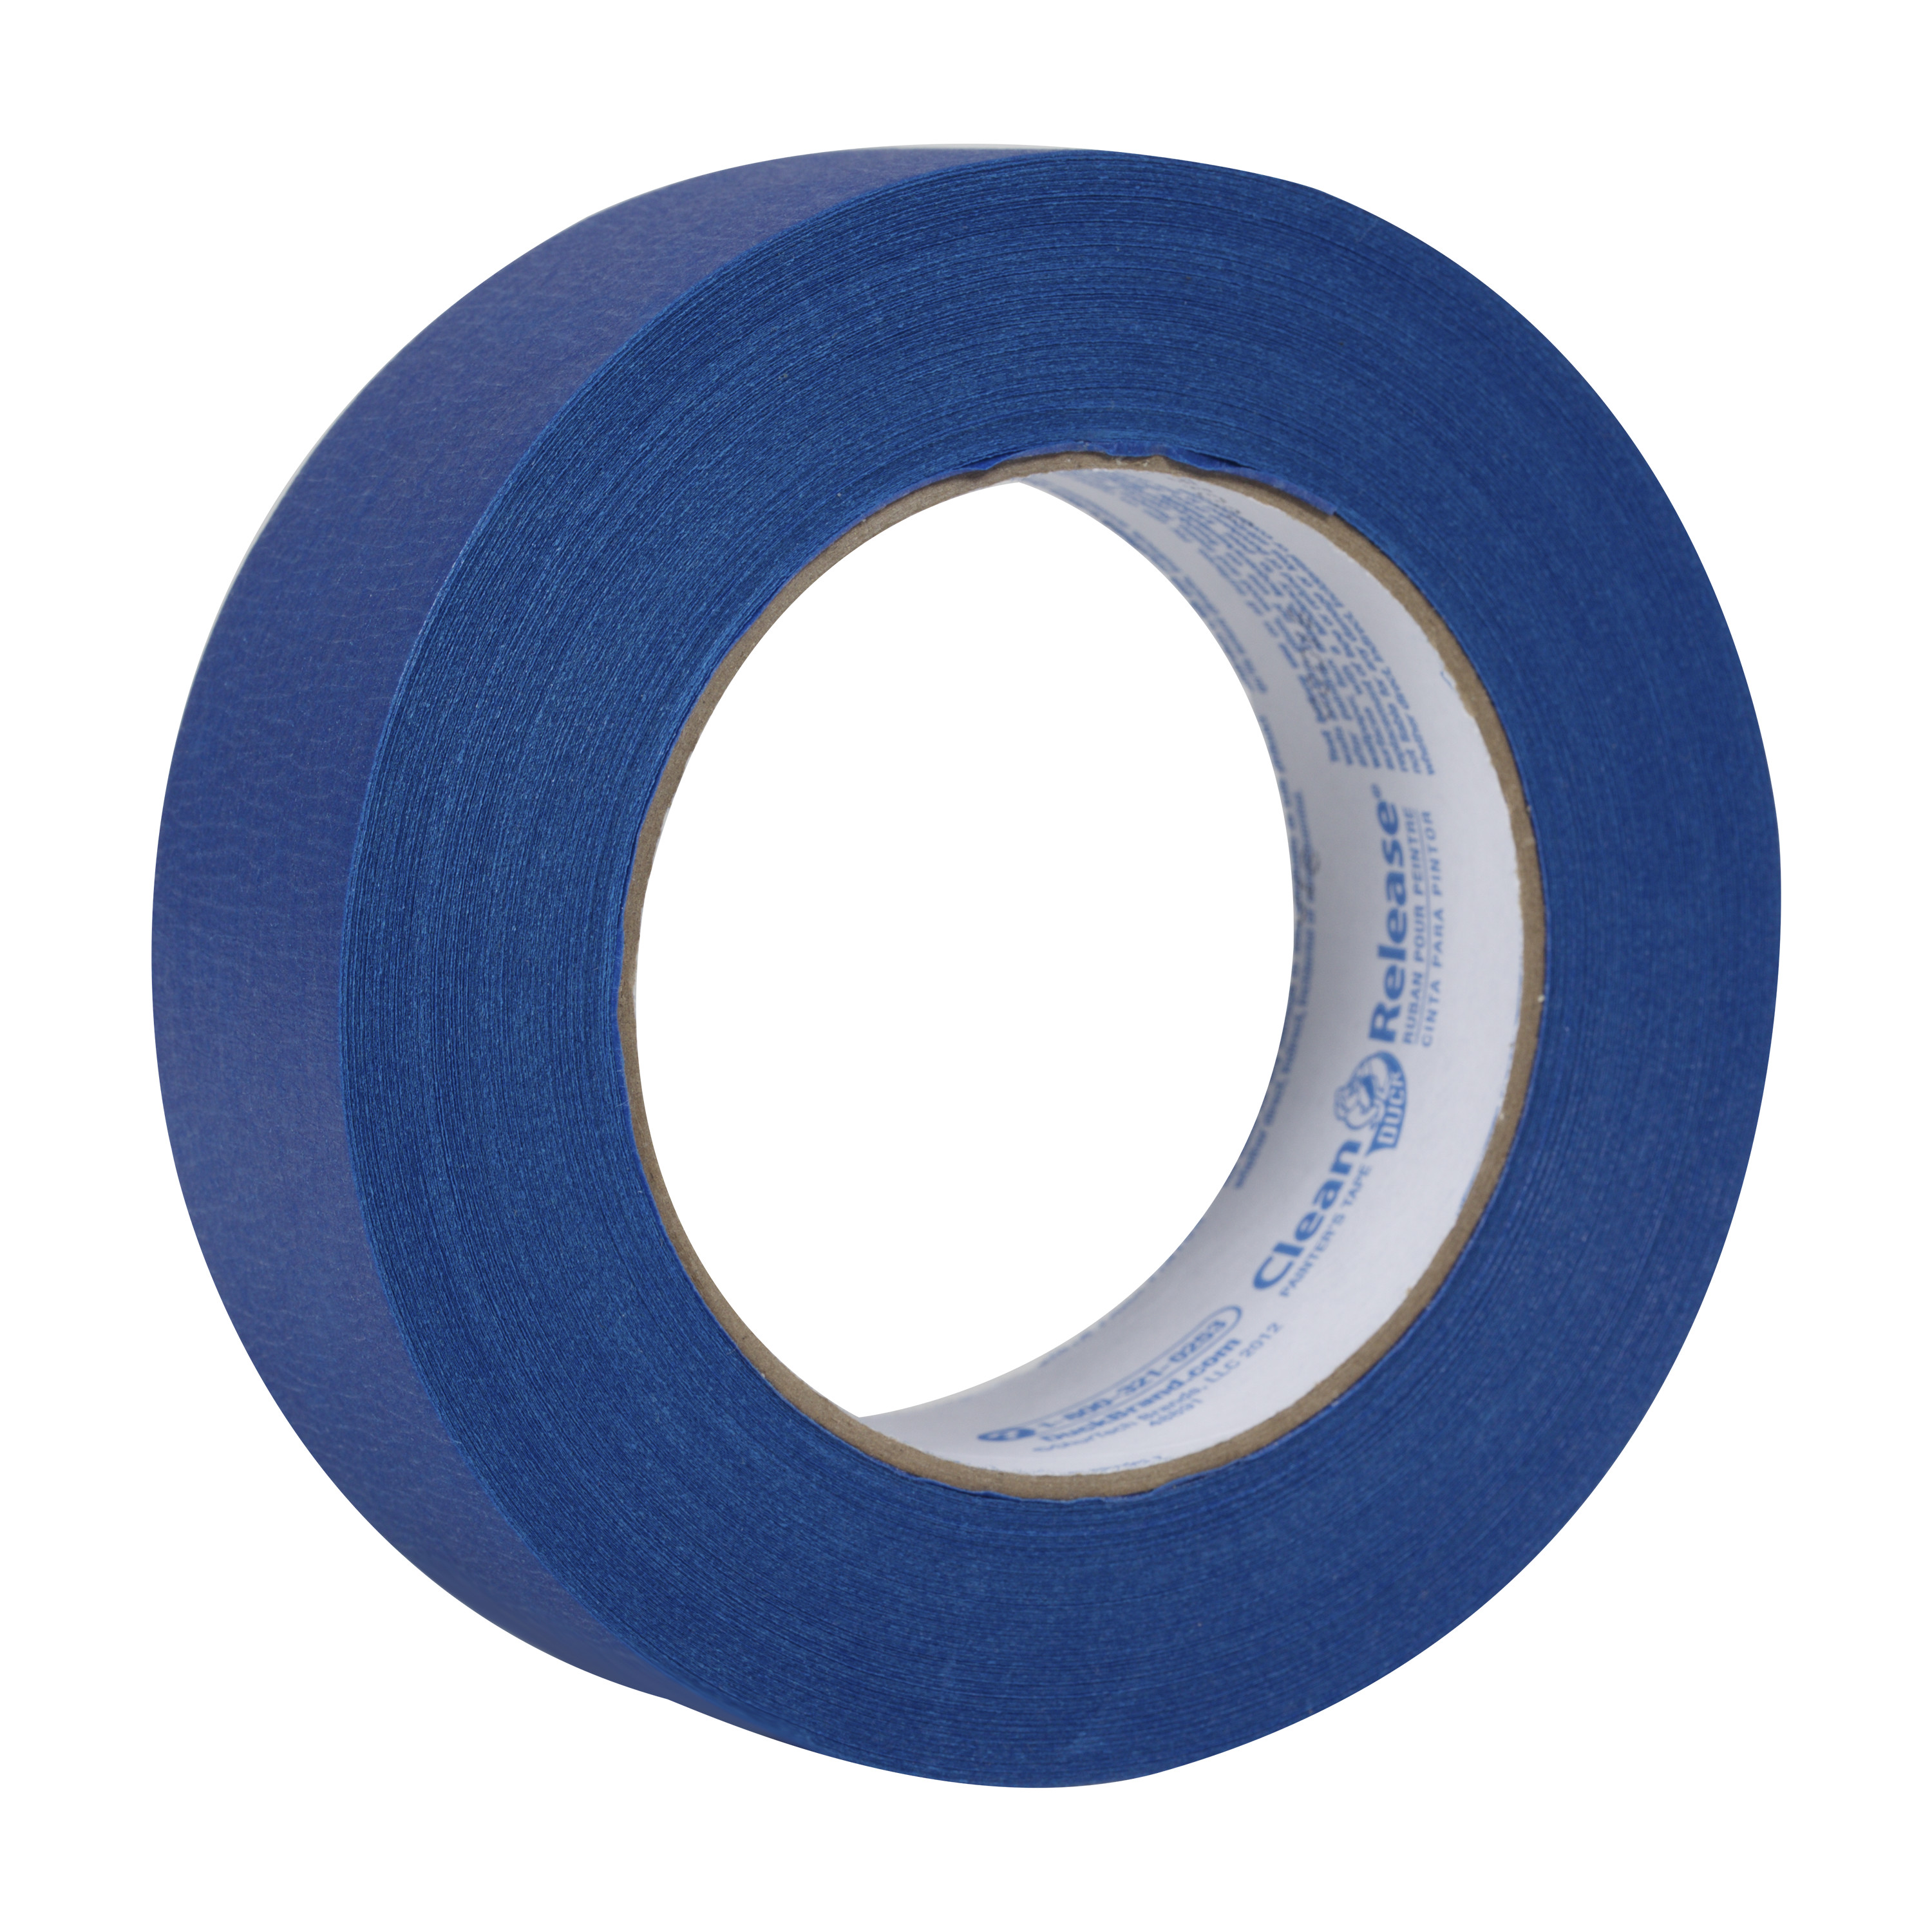 Duck Clean Release 1.41 in. x 60 yd. Blue Painter's Tape - image 5 of 11